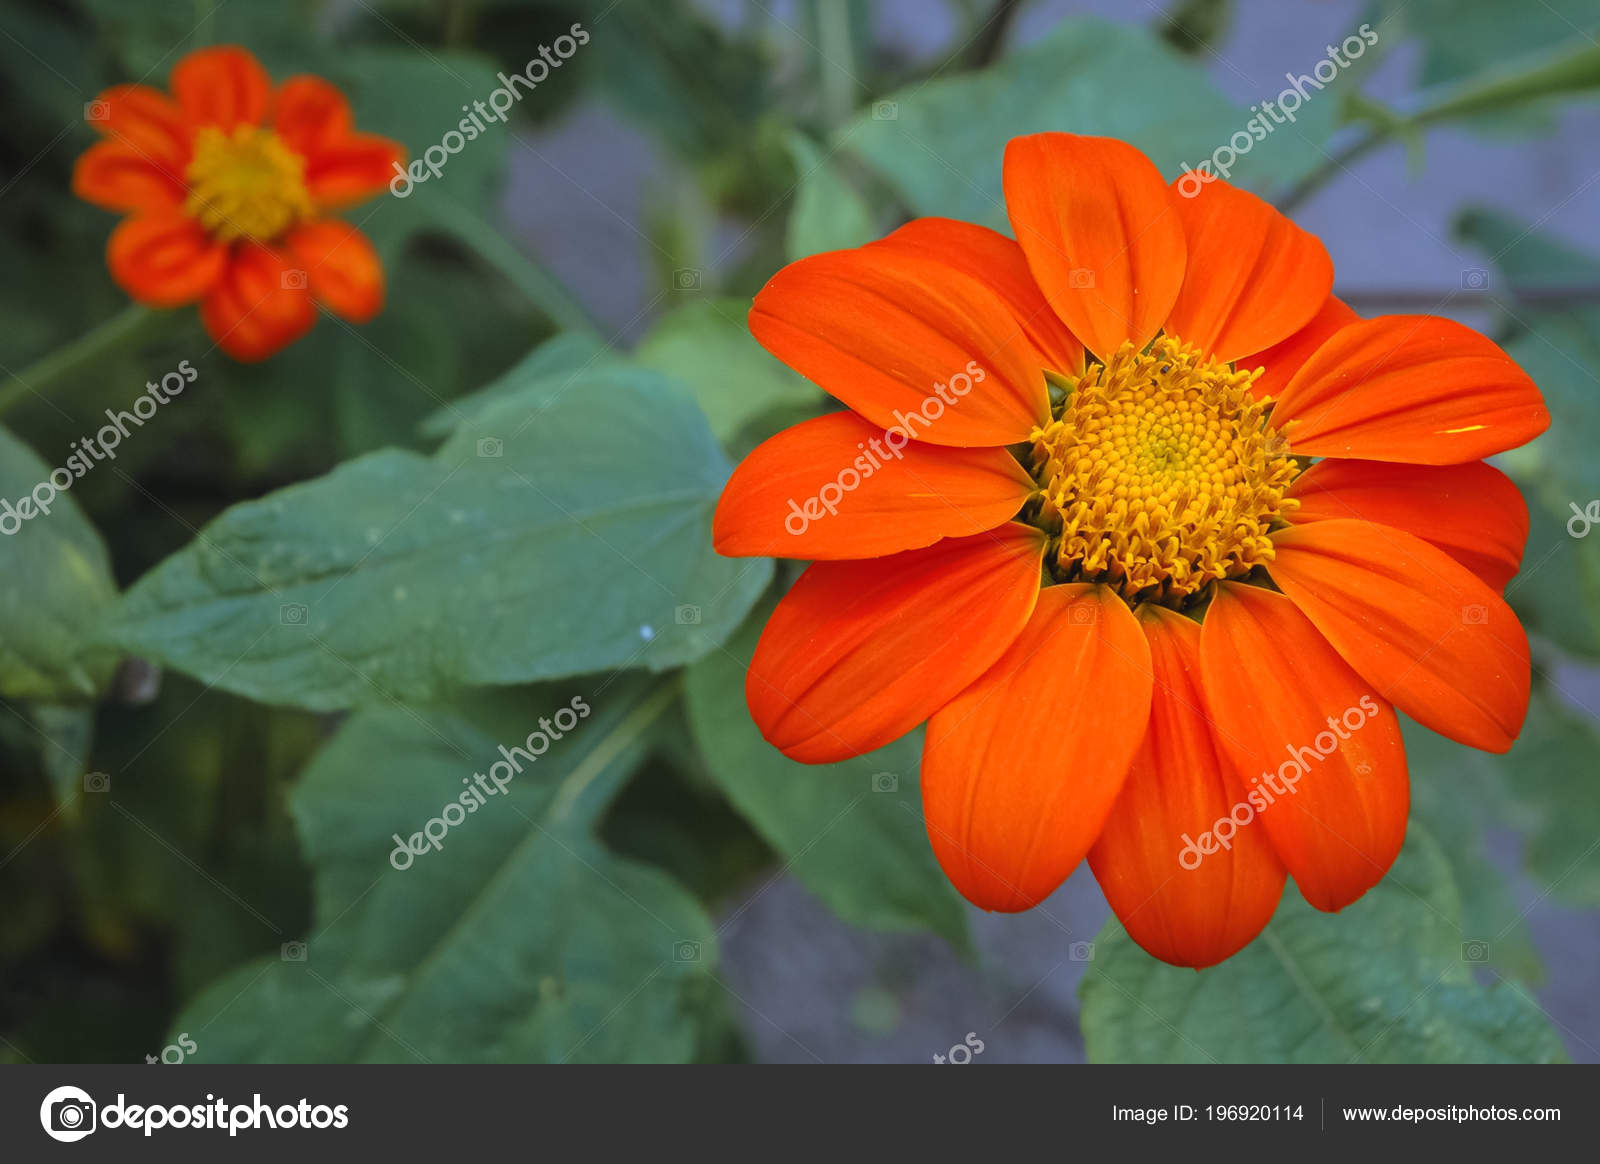 Details Tithonia Rotundifolia Flower Garden Commonly Known Red Mexican Sunflower Stock Photo C Fotokon 196920114